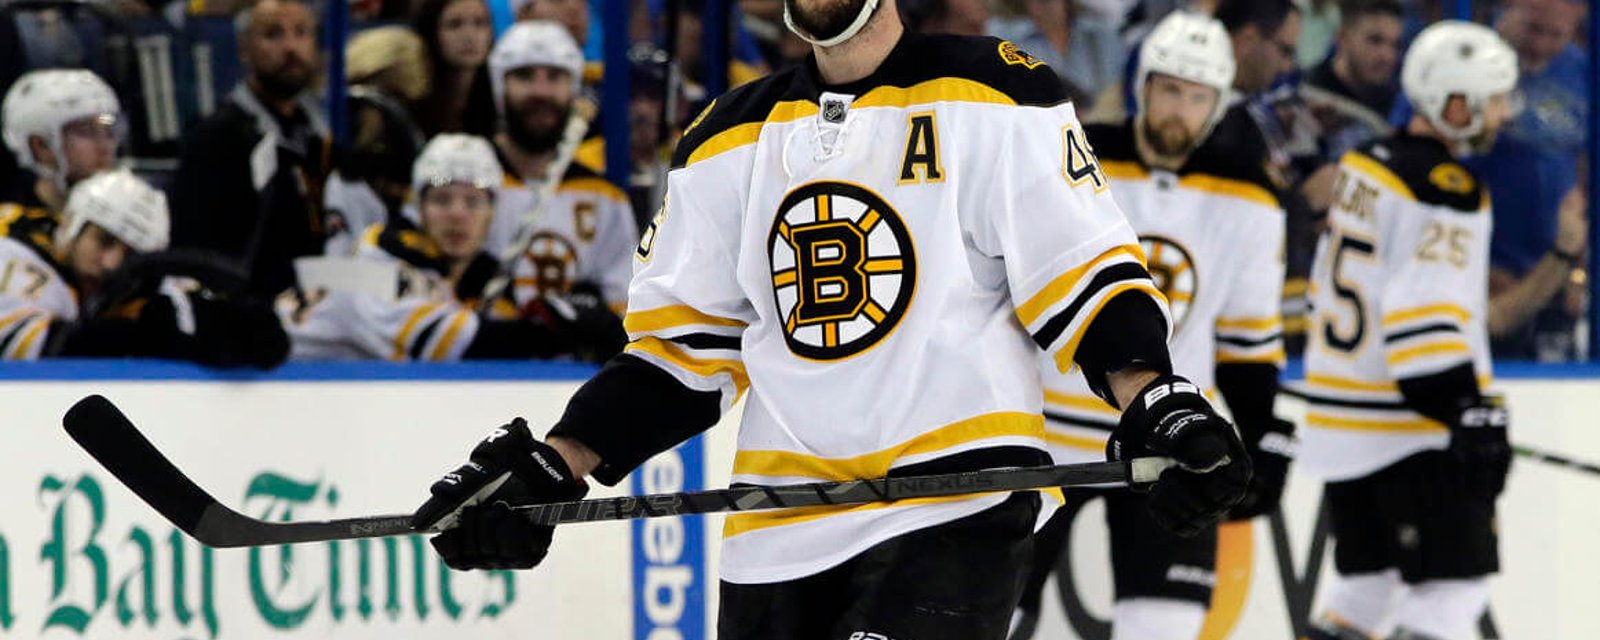 Bruins player worried he's on the way out